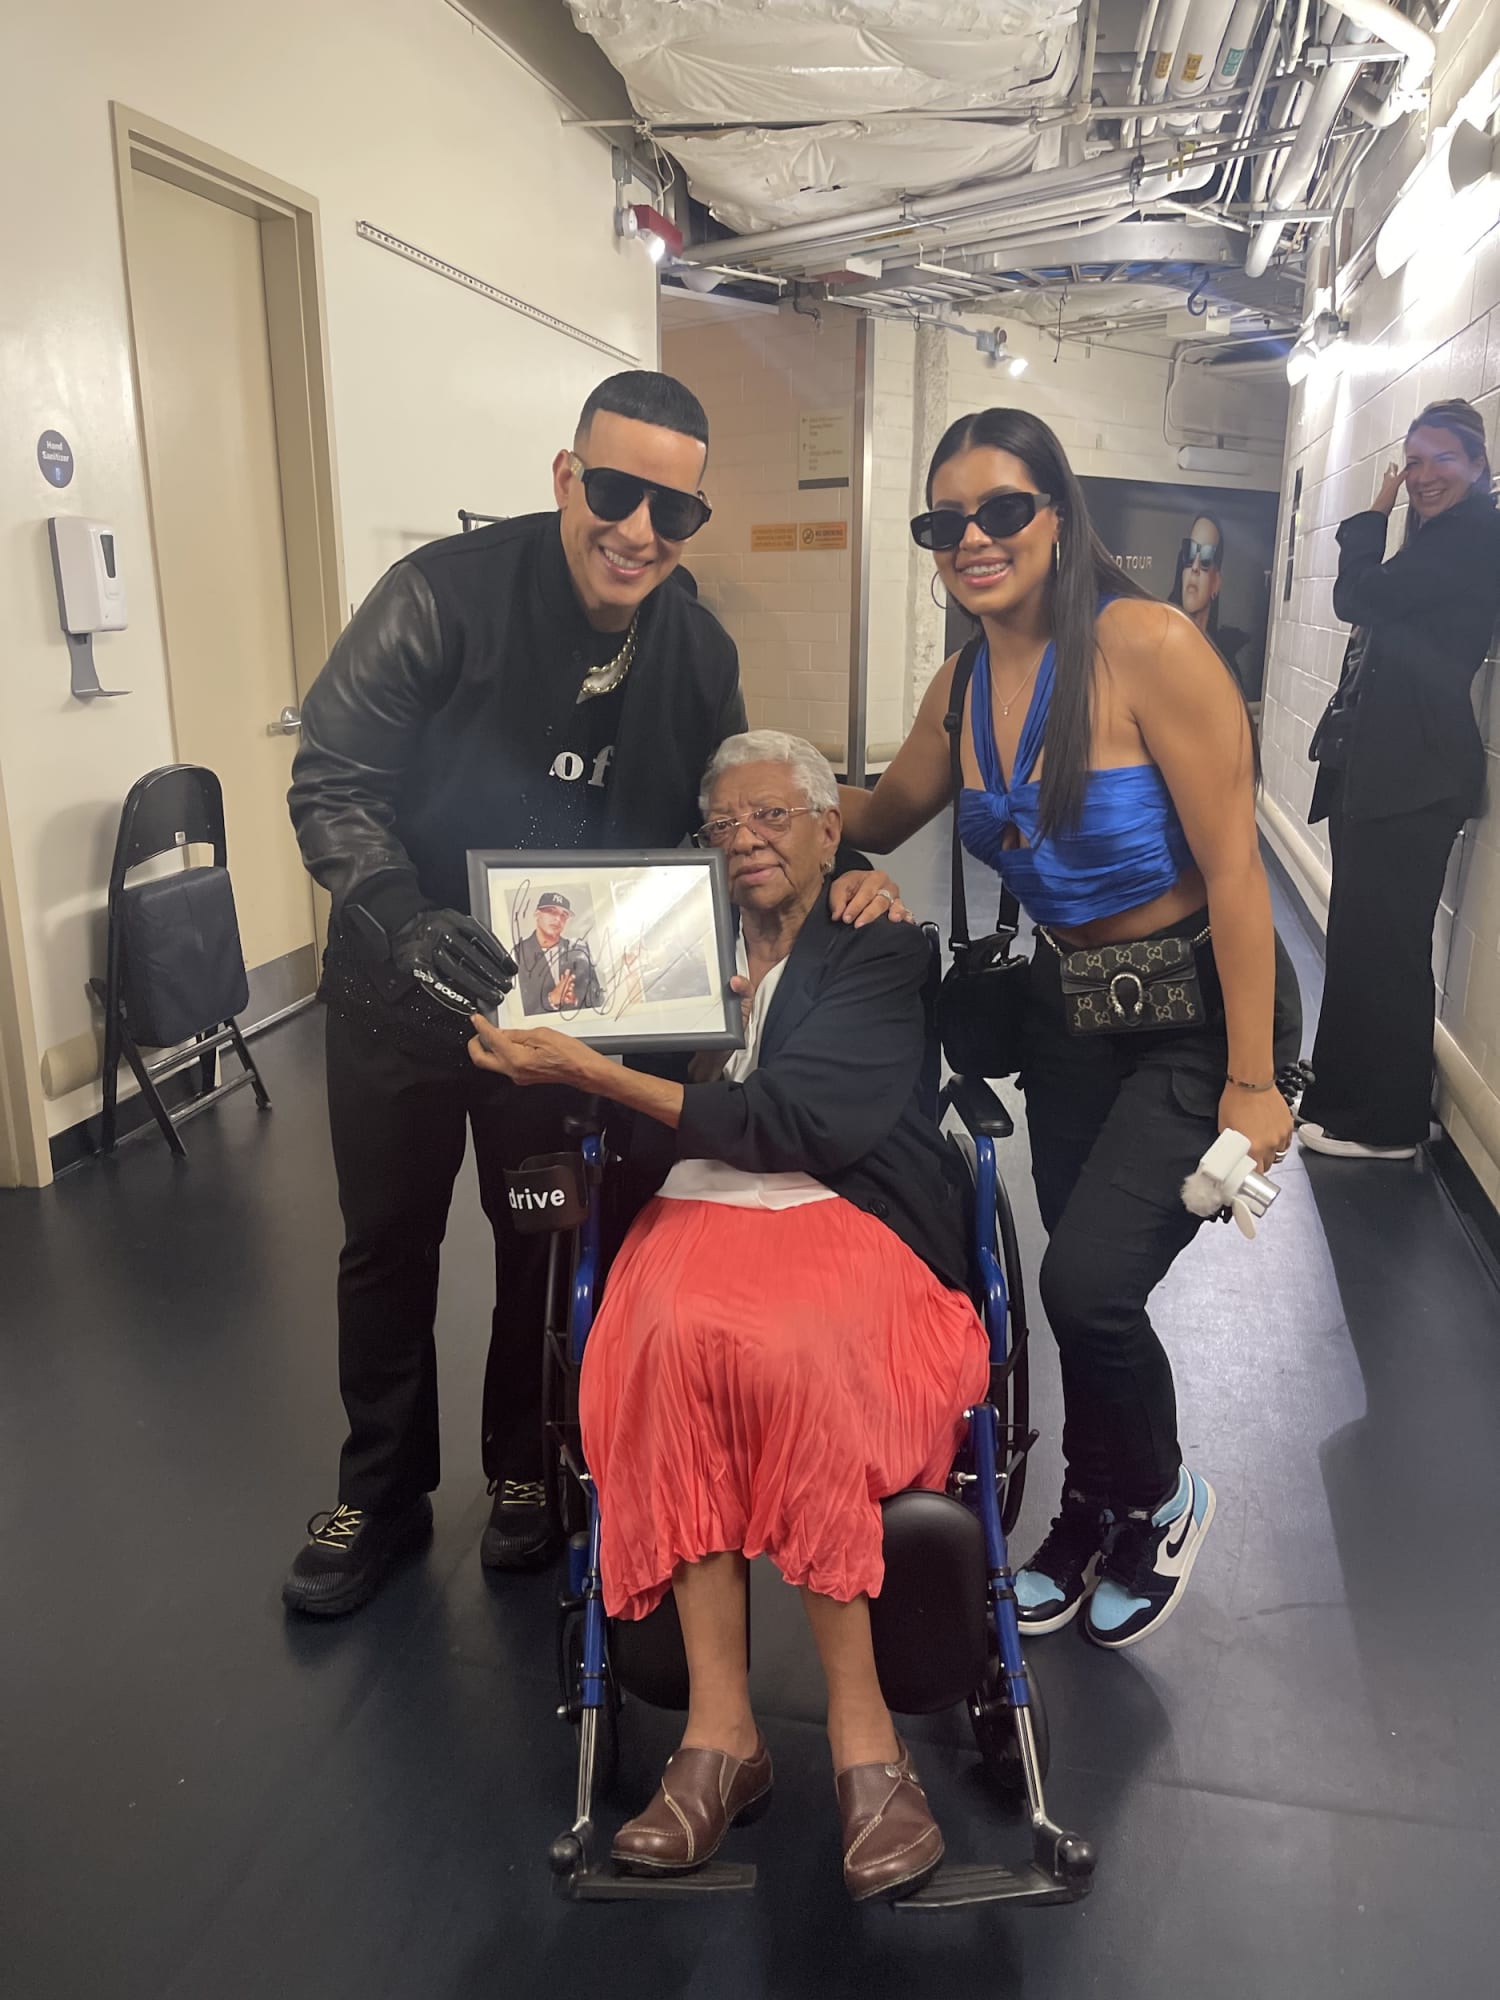 A 90-year-old Grandmas Wish to Meet Daddy Yankee Comes True